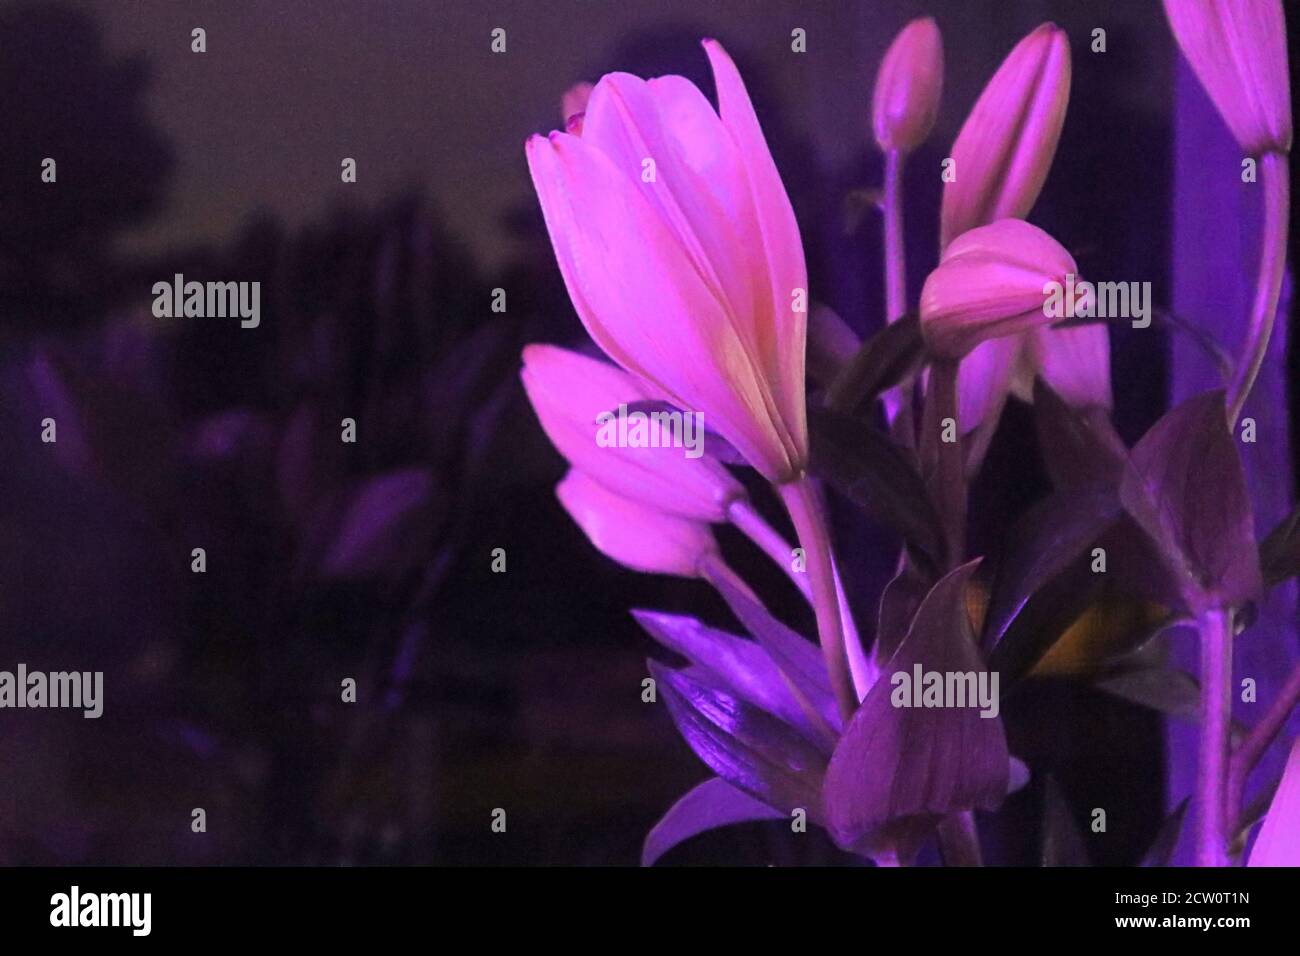 lilies with colored led lighting Stock Photo